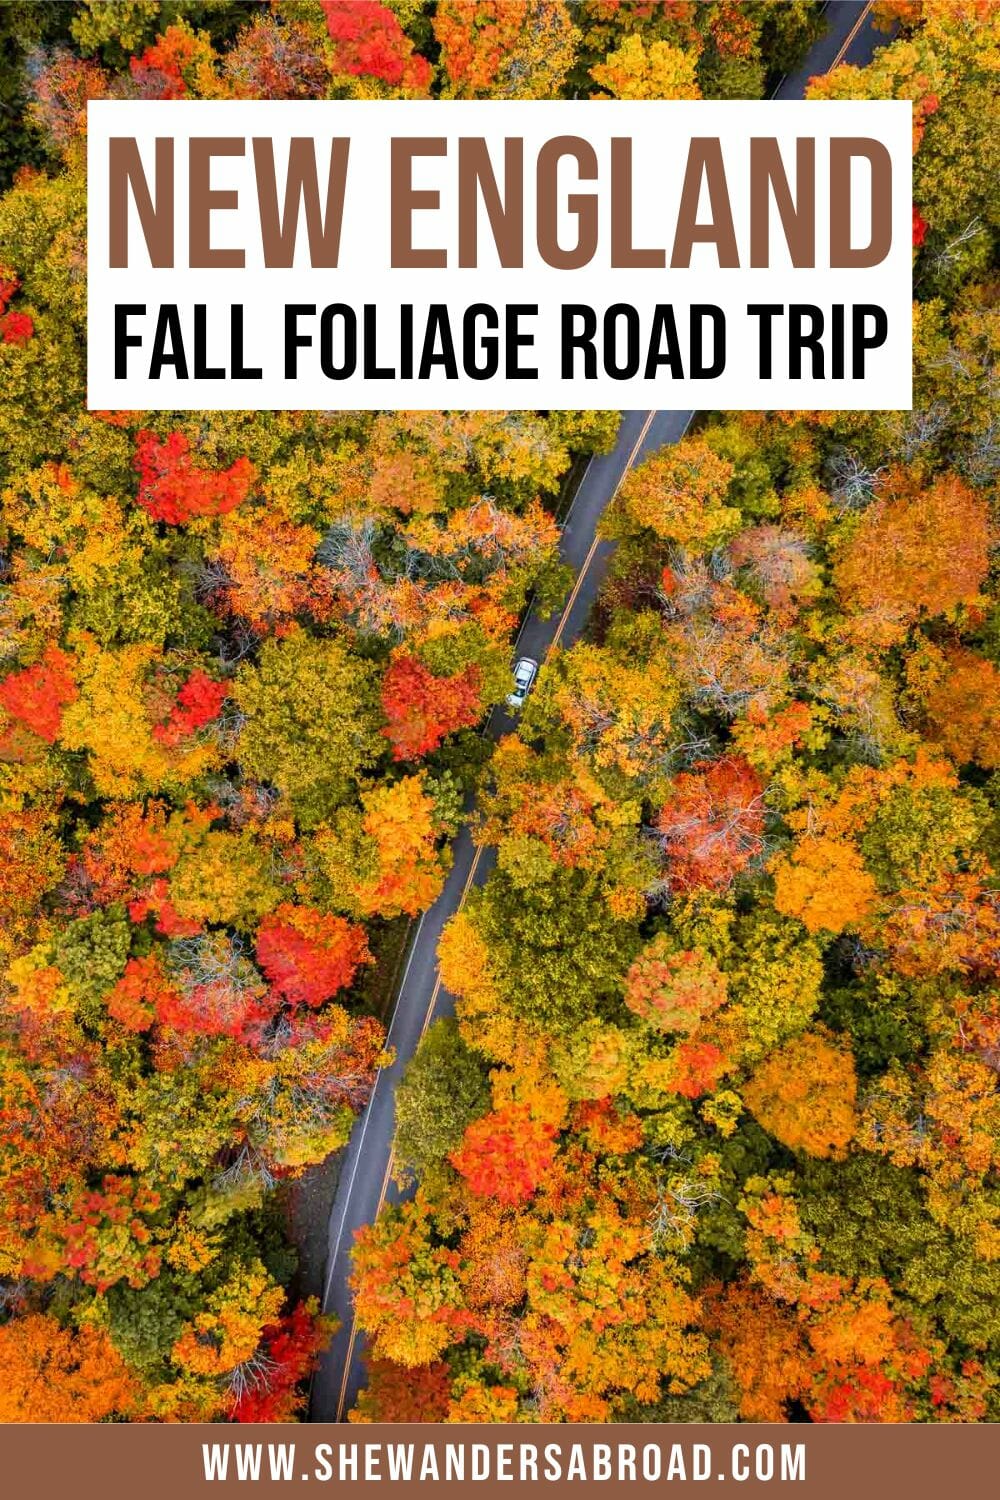 The Perfect New England Fall Road Trip for 2 Weeks